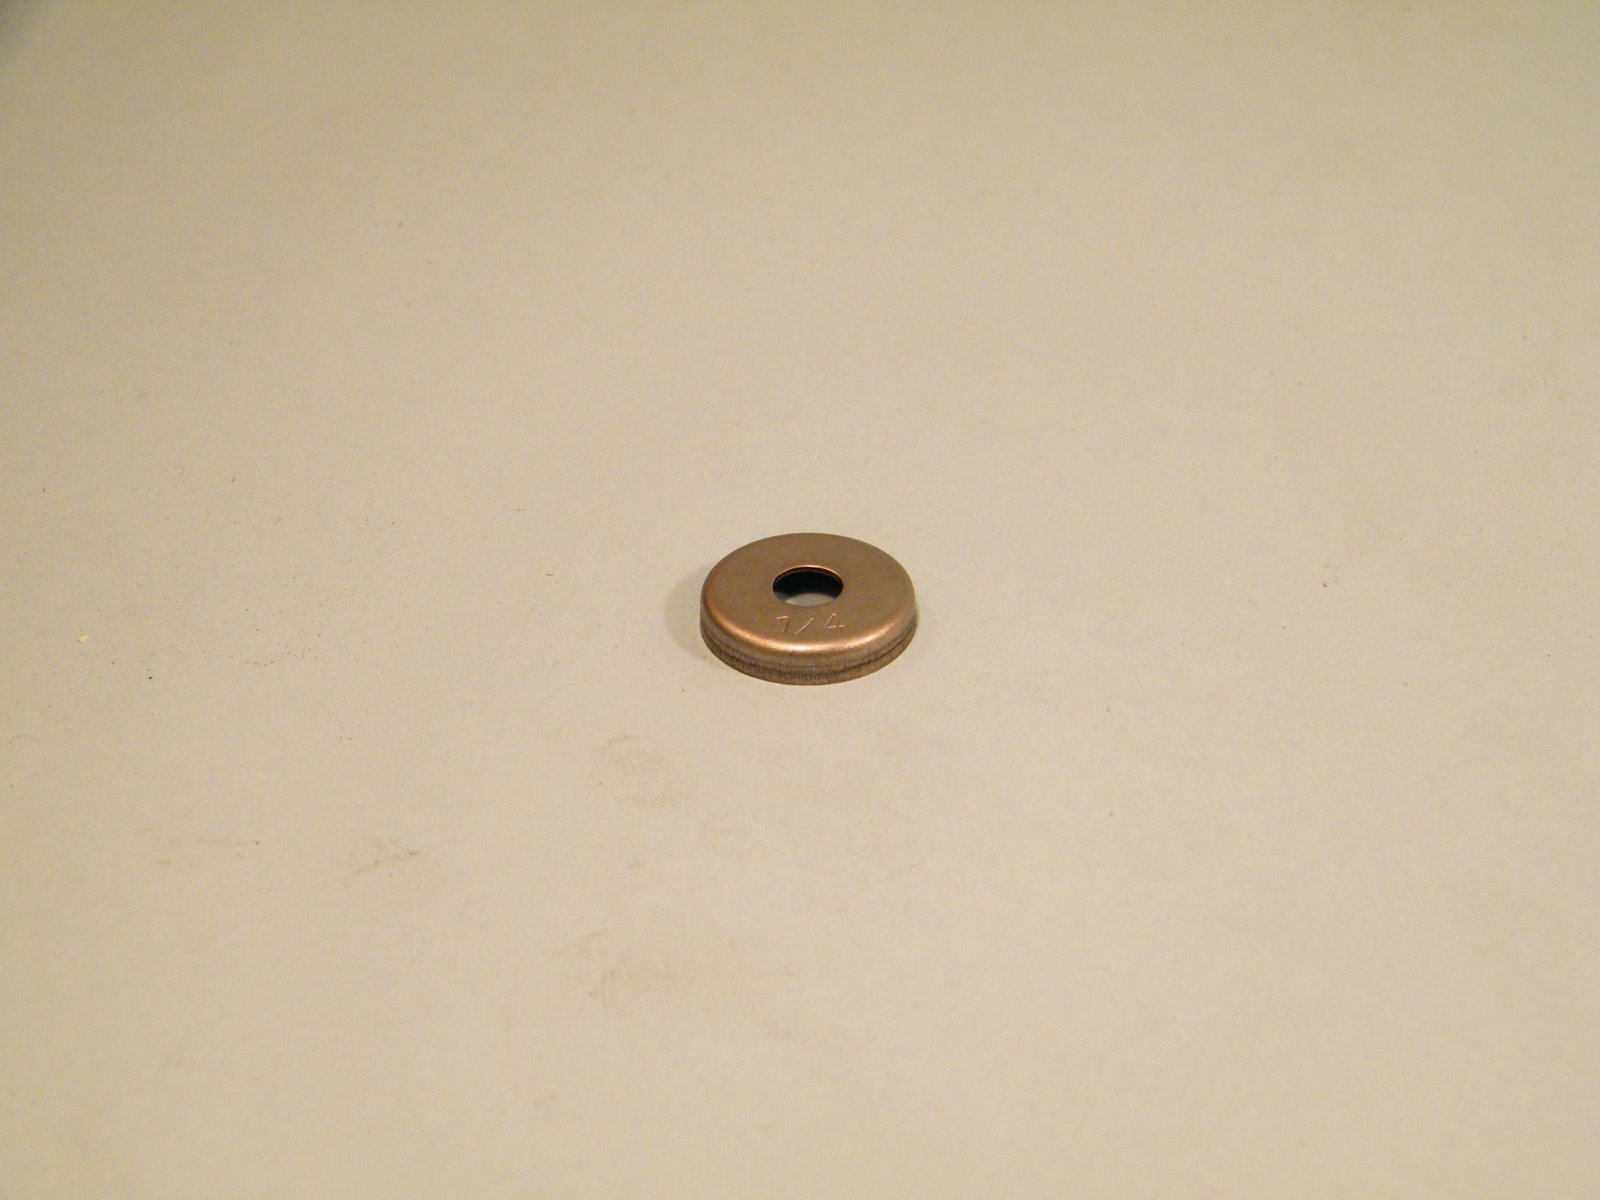 1/4 FAUCET WASHER RETAINER